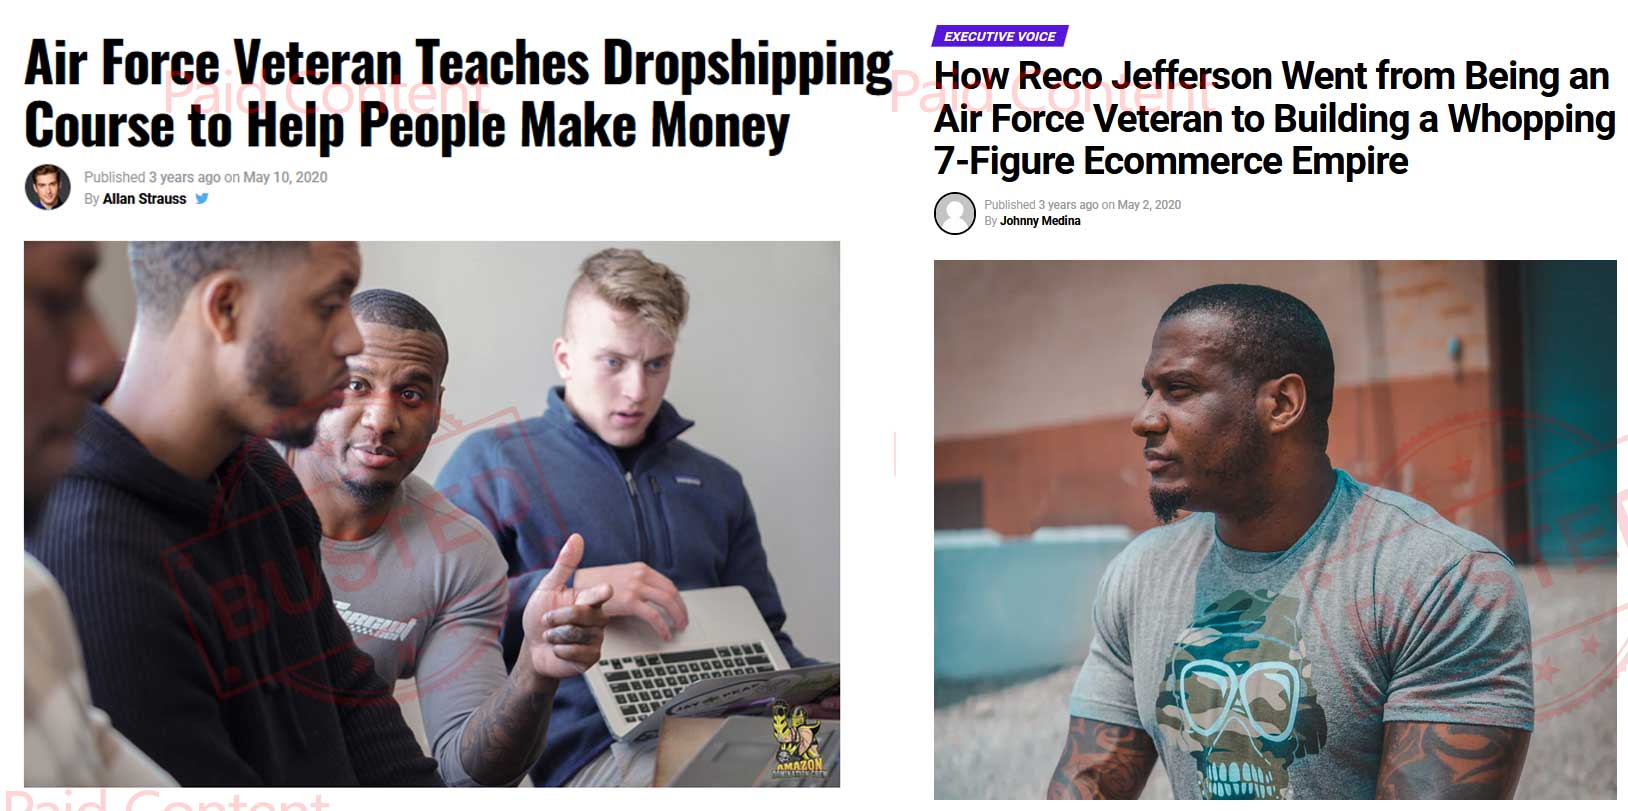 Reco-Jefferson-Paid-Article